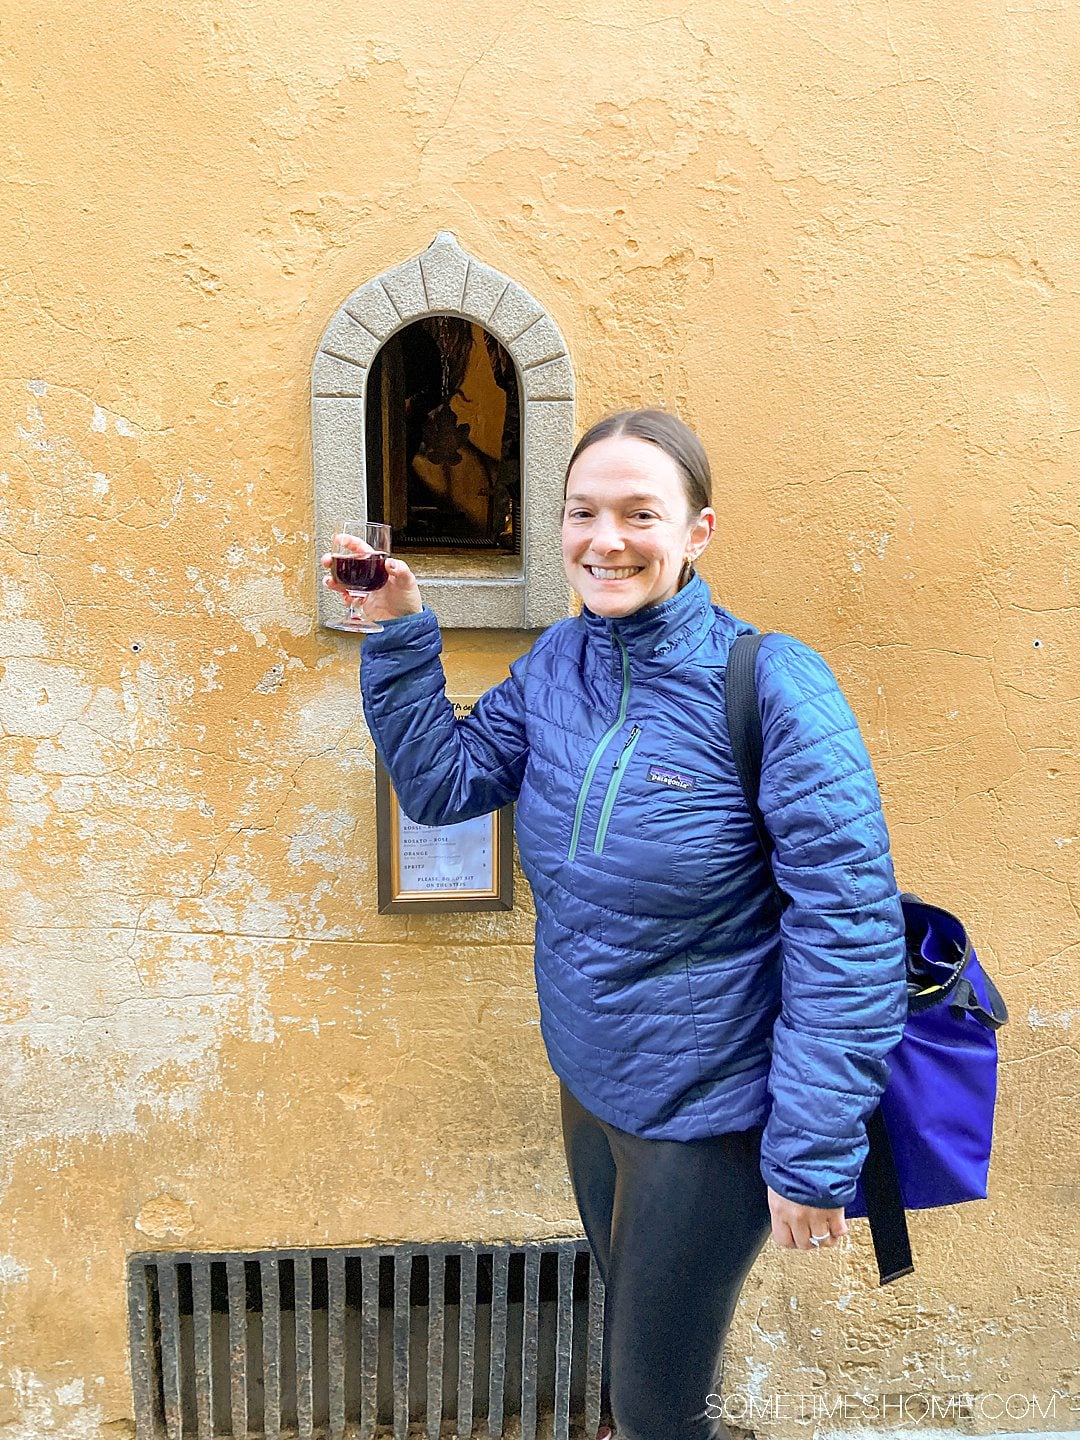 Woman holding a glass of red wine given through a wine window during a food tour in Florence.